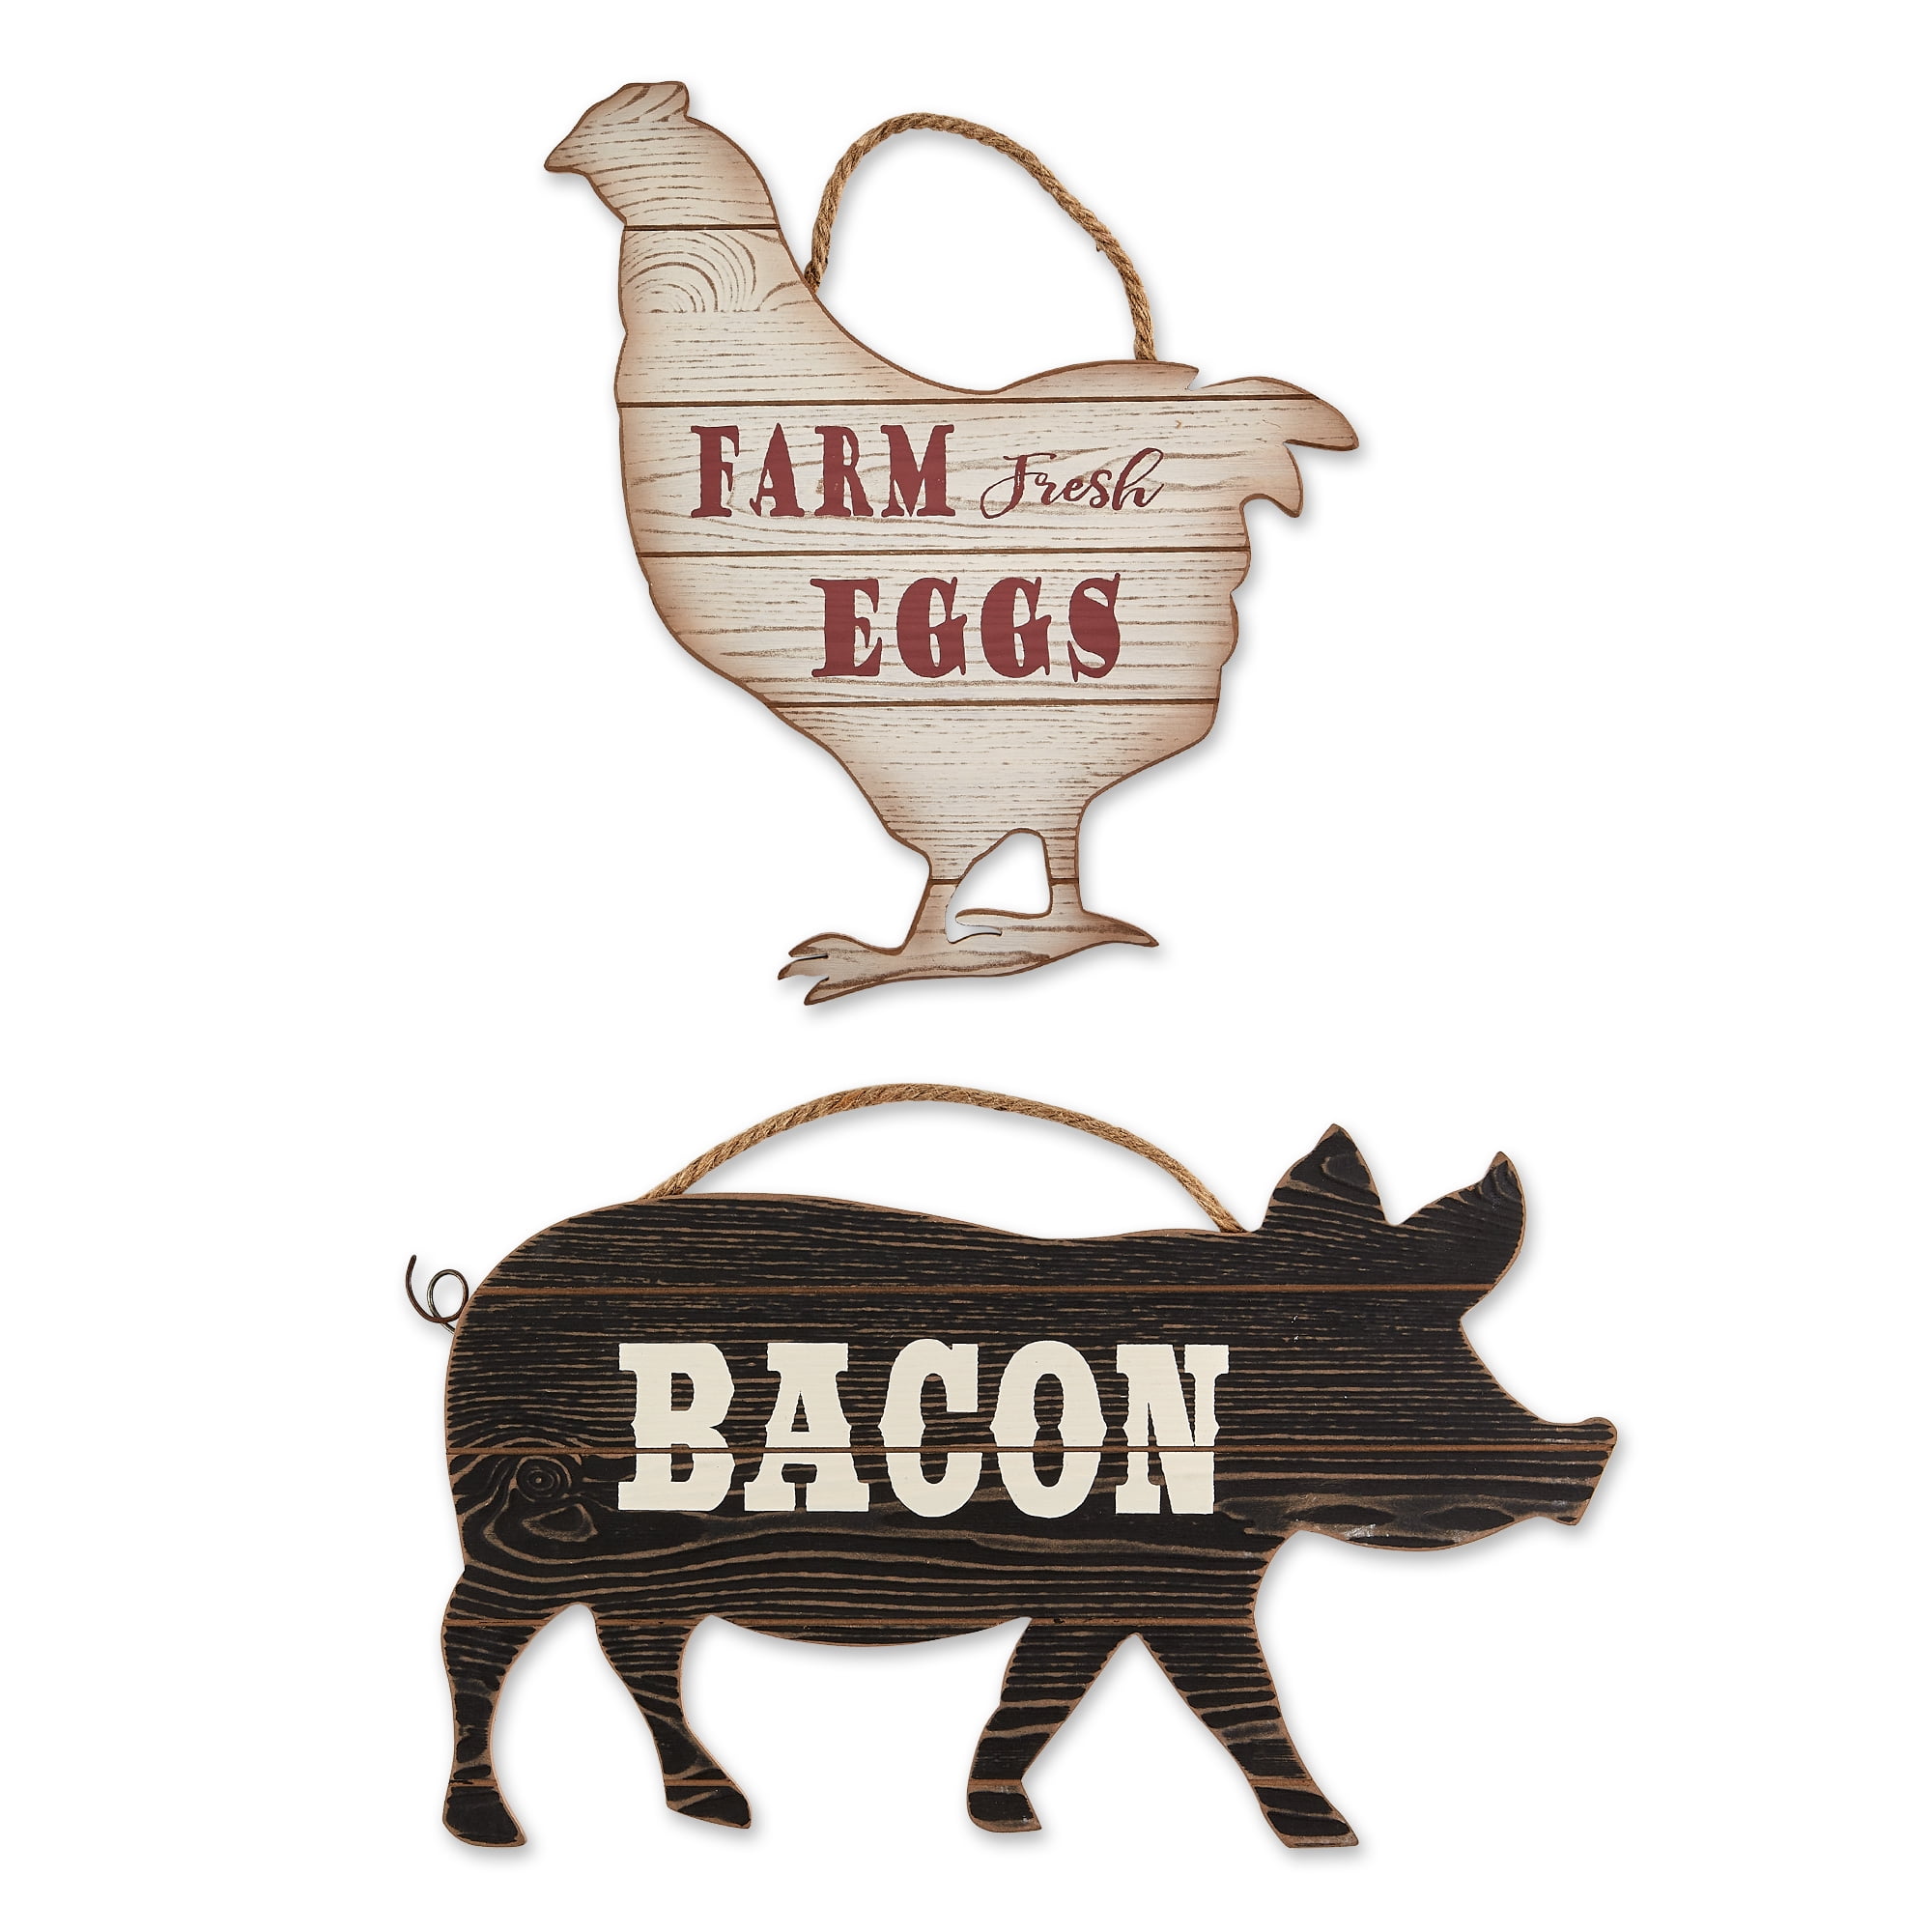 Chickens with Pig handcrafted on old barn wood. Farm Animal Sign